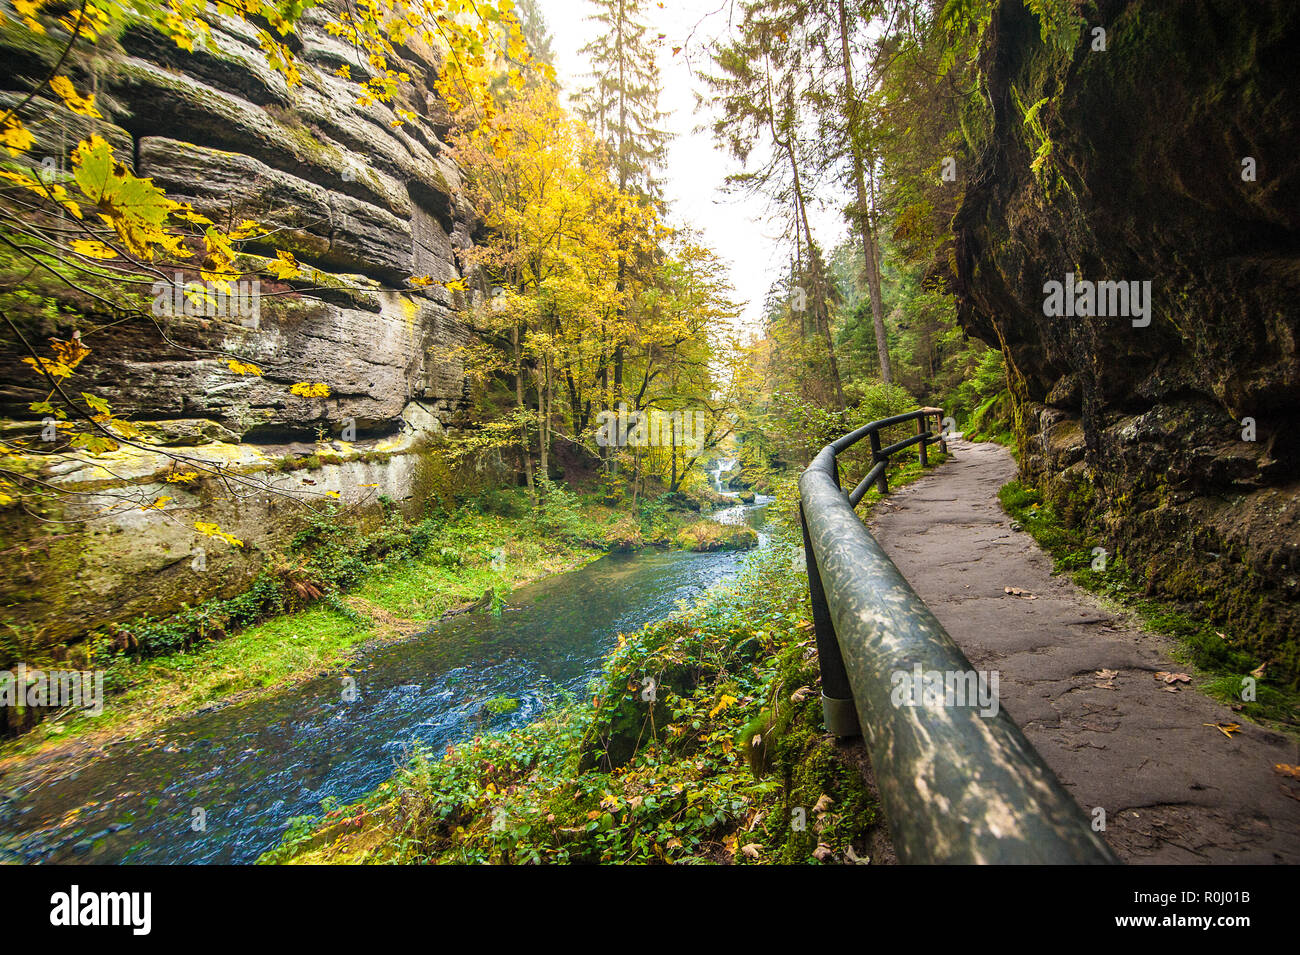 Picturesque view of Hrensko national Park, situated in Bohemian Switzerland, Czech Republic Stock Photo